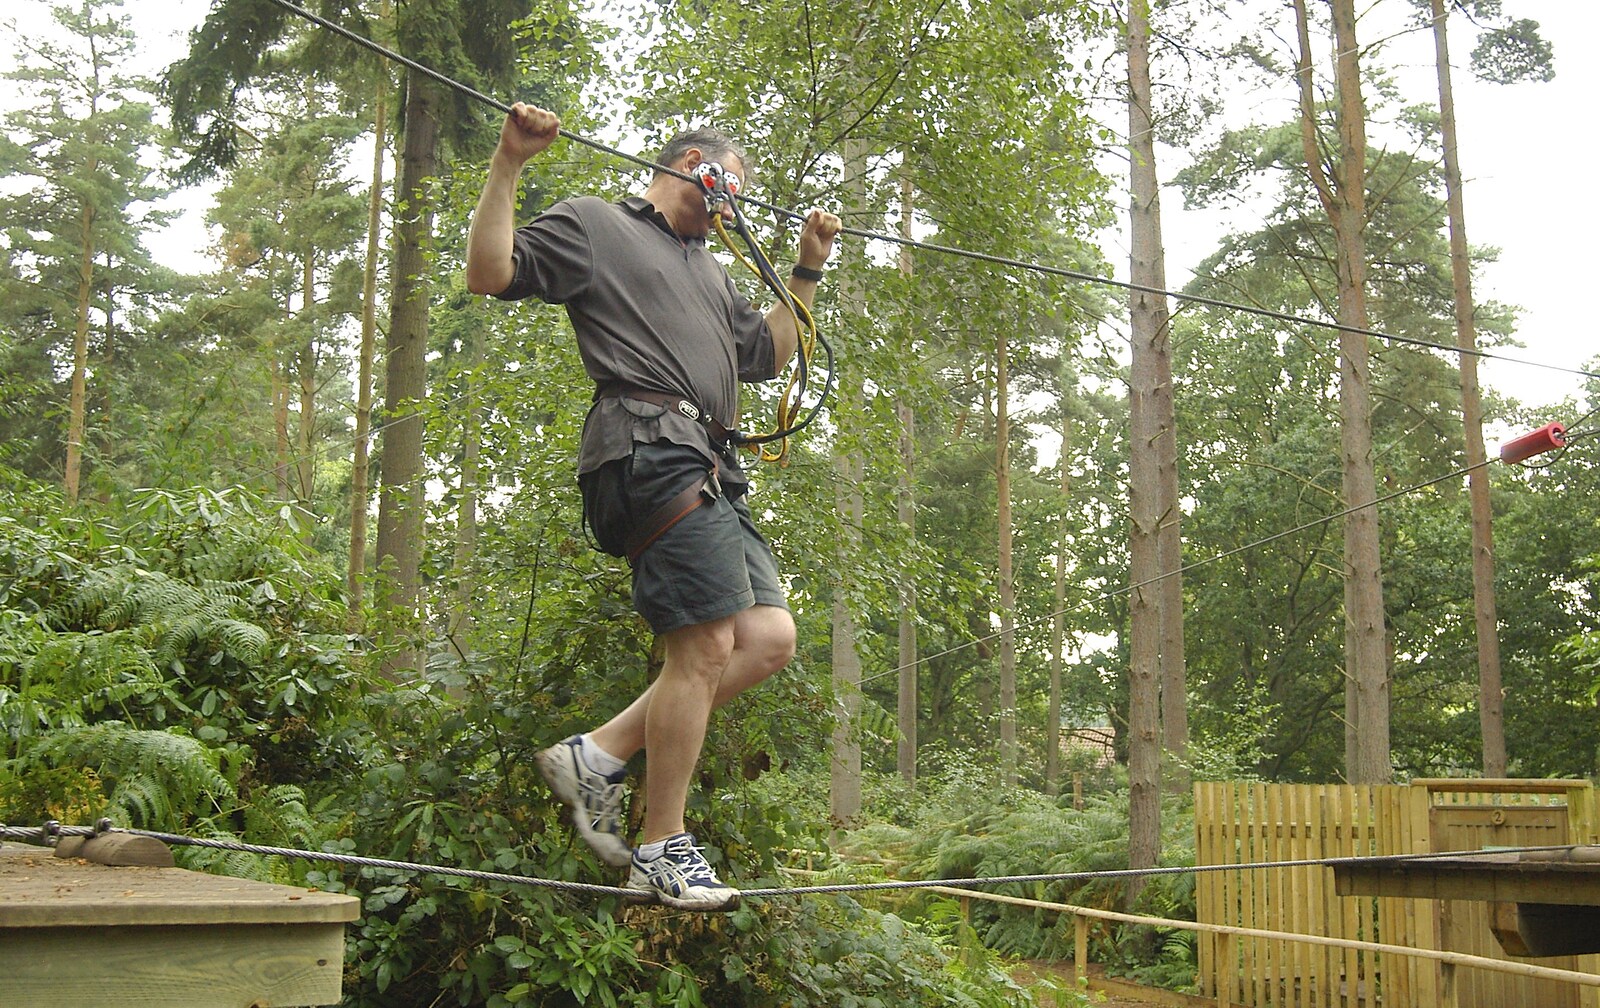 Dave B on a wire from Qualcomm Cambridge "Go Ape", High Lodge, Thetford Forest - 27th July 2006